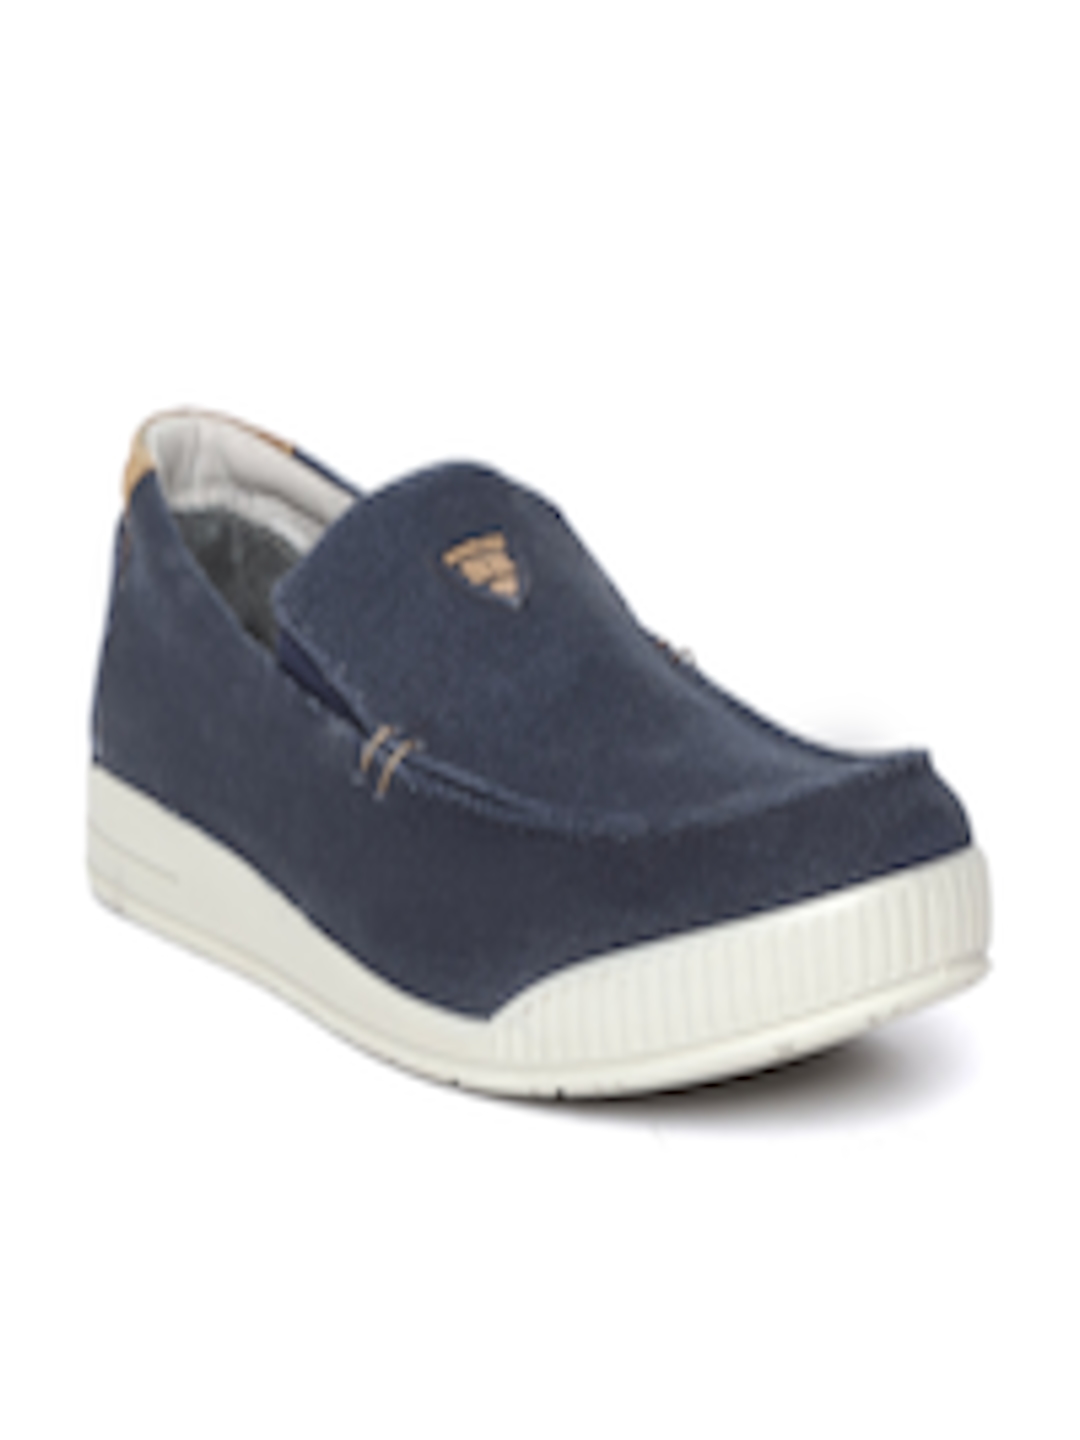 Buy Woodland Men Navy Blue Slip Ons - Casual Shoes for Men 8451453 | Myntra